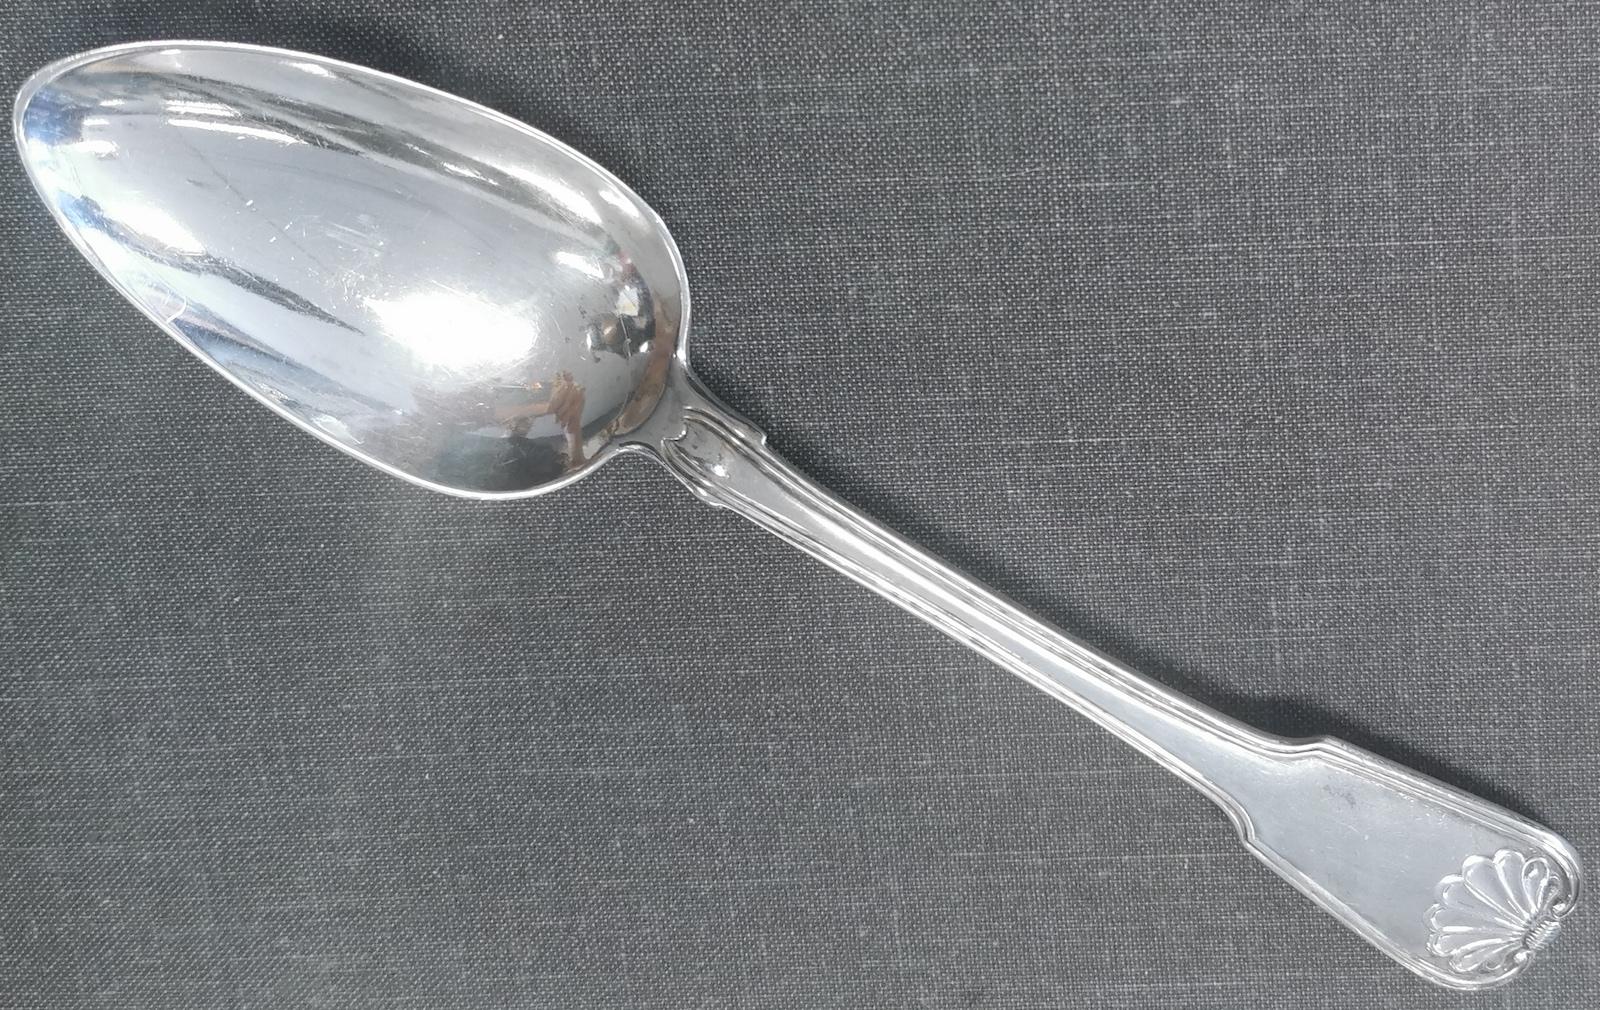 George IV, Irish sterling silver Kings pattern serving spoon,
Dublin, 1827,
Makers mark SN (Samuel Neville),
small ding in the bowl,
3.7 ounces, 105 grams.